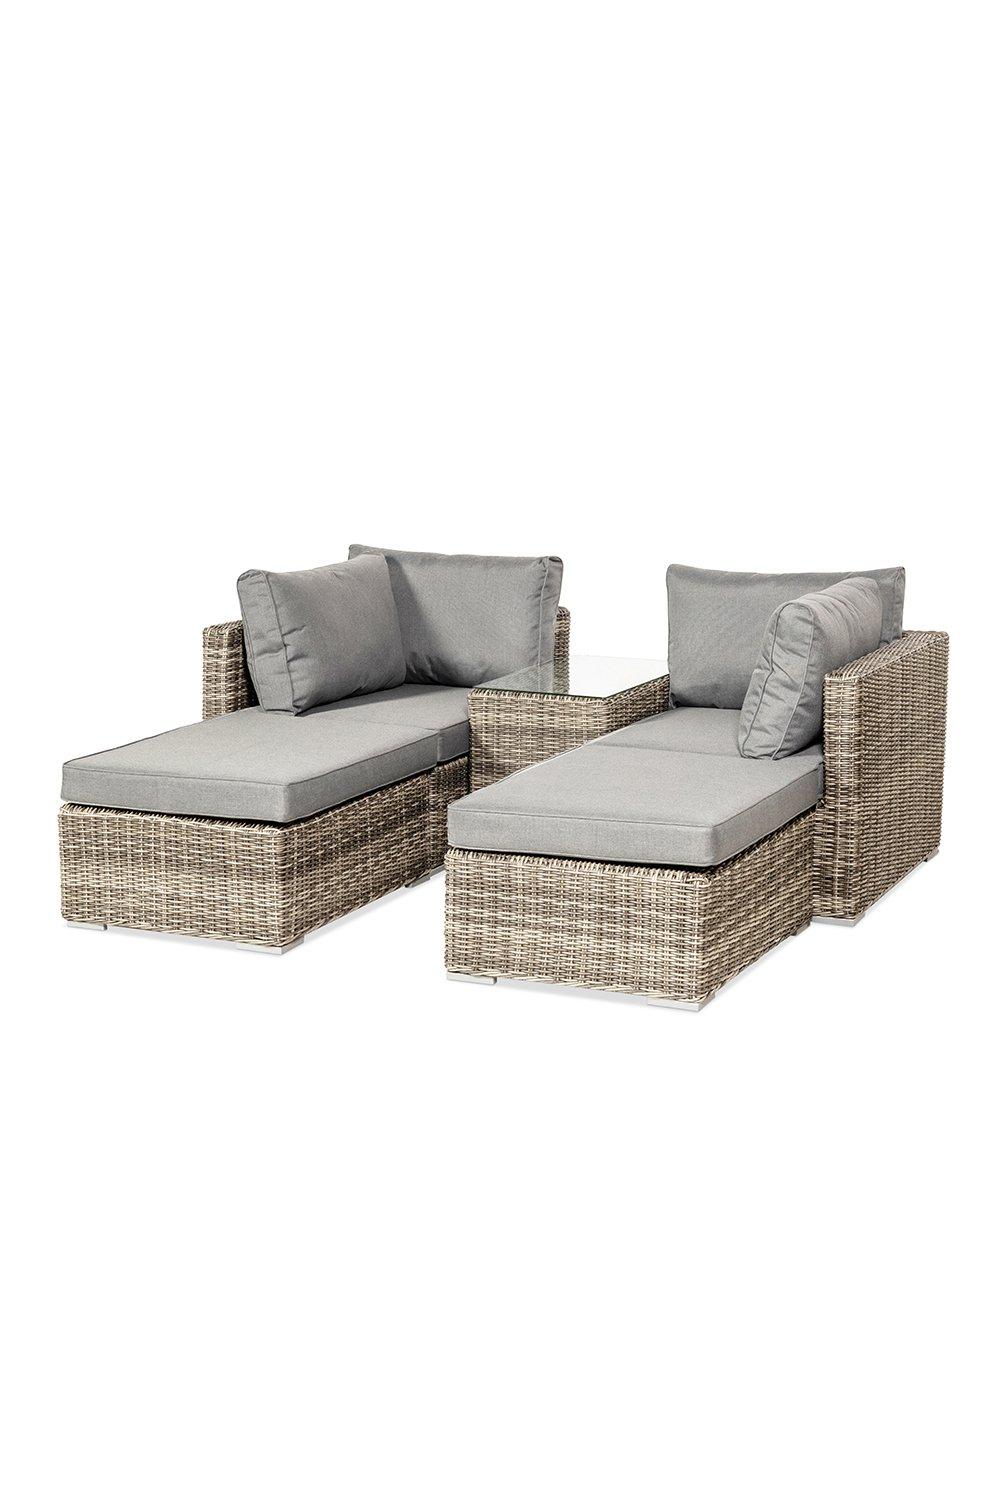 WENTWORTH 4 Seater MULTI RELAXER SET